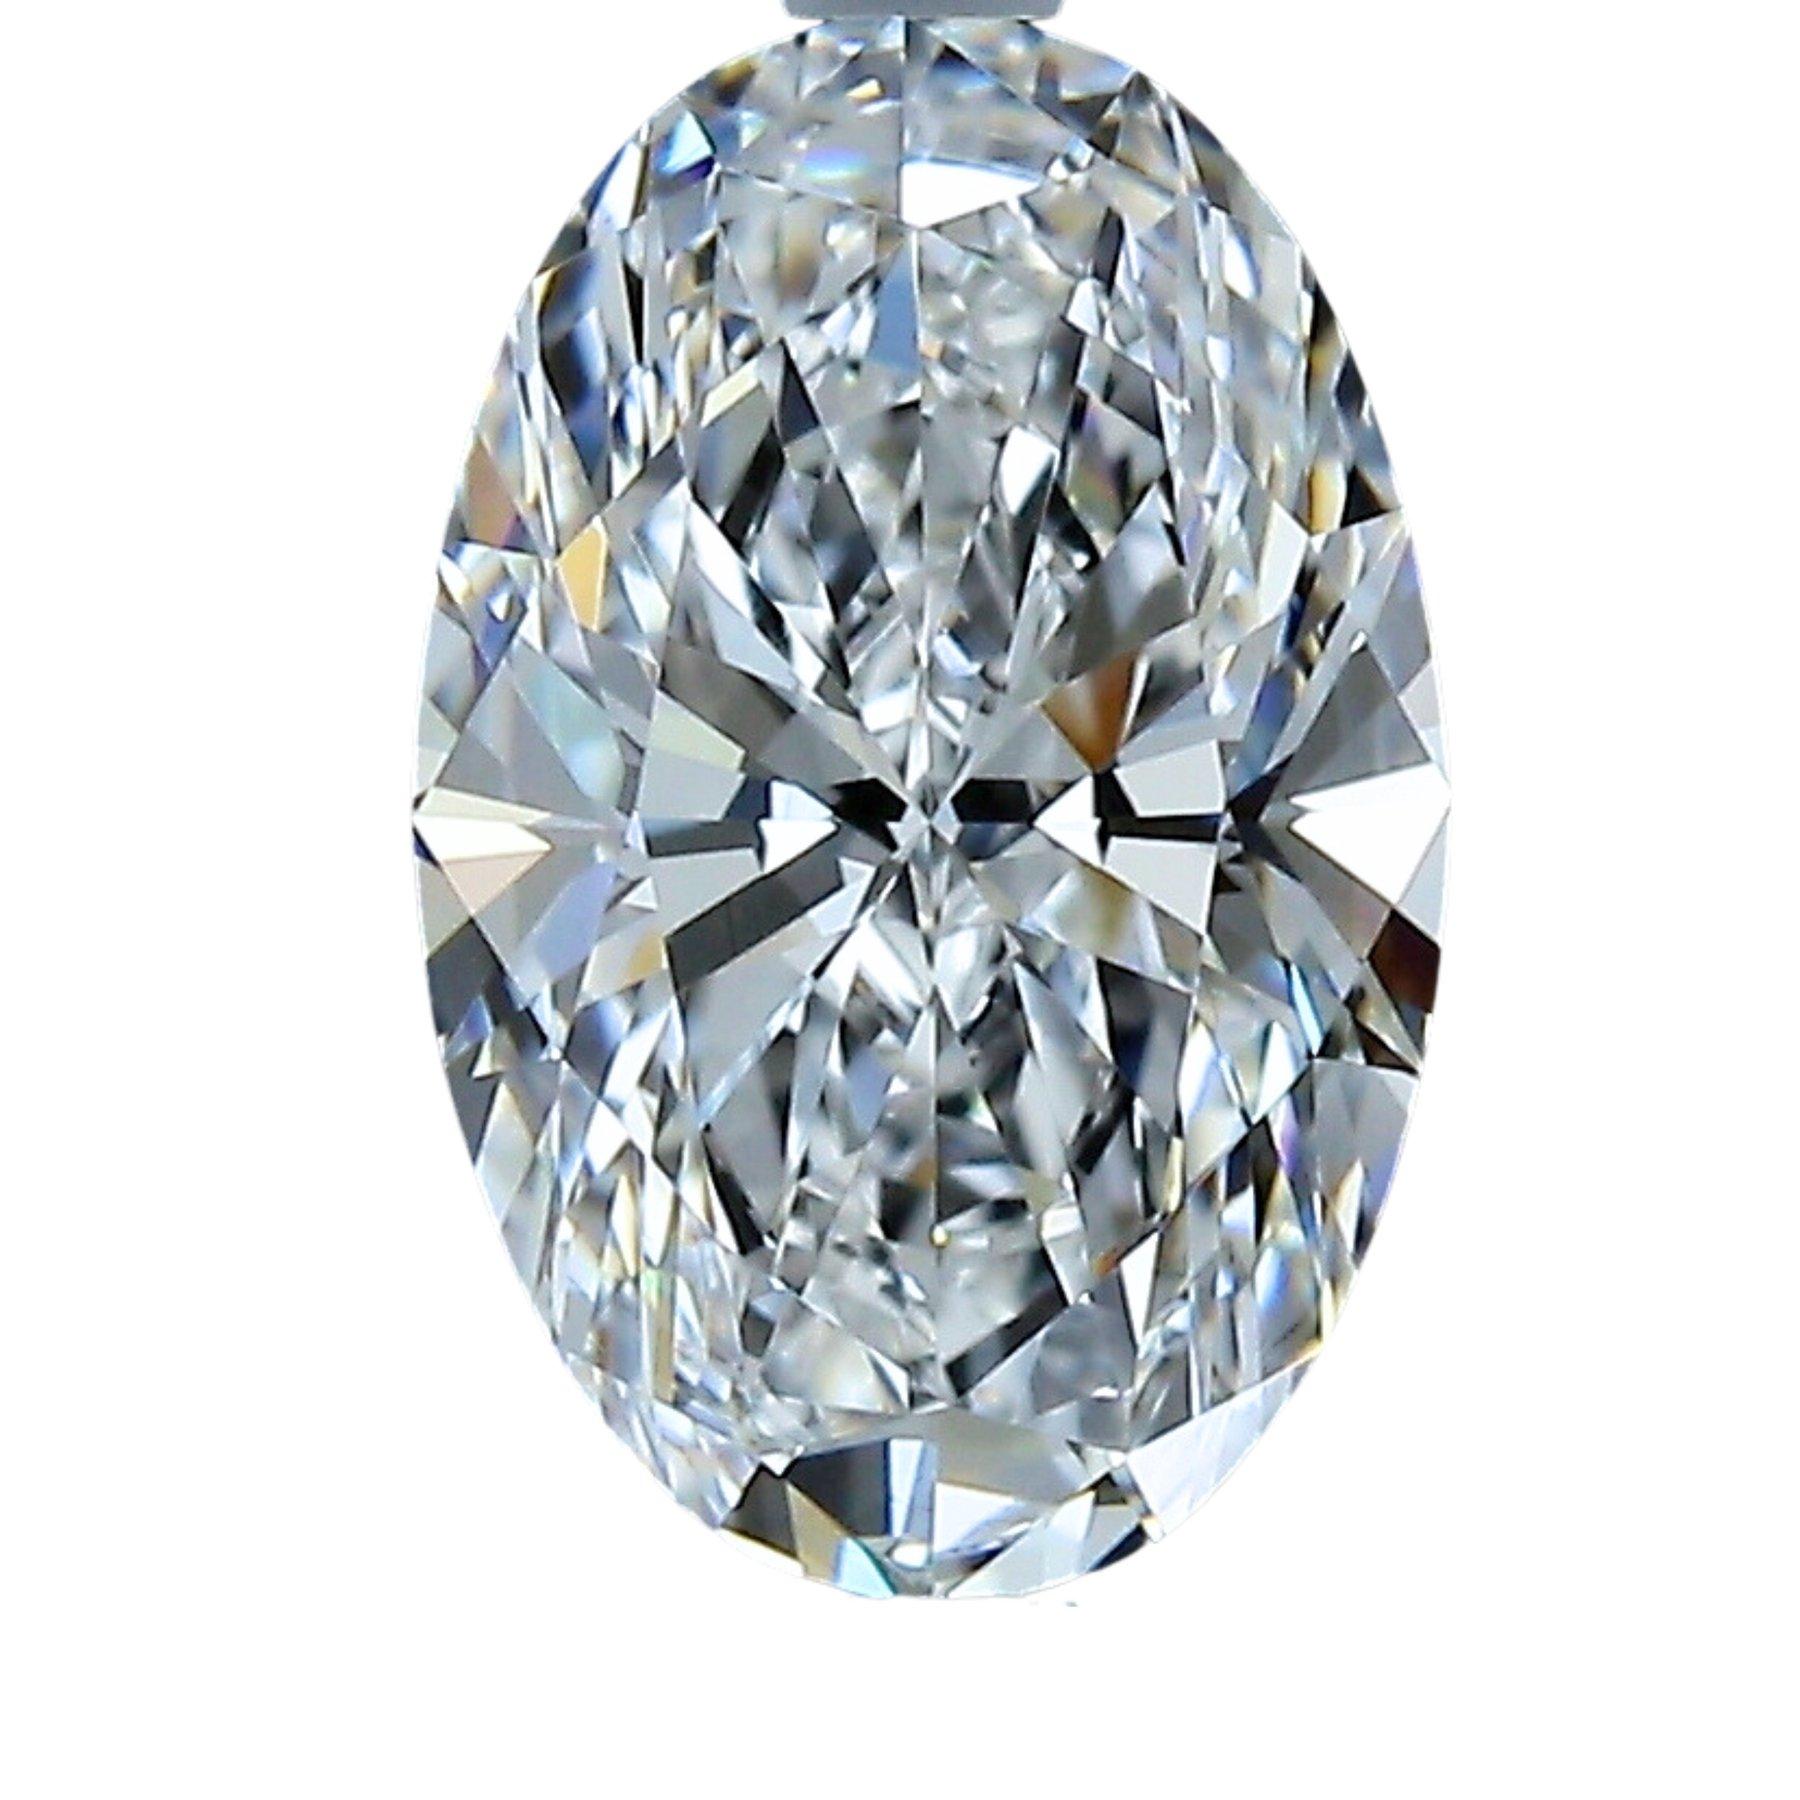 Magnificent 0.72 ct Ideal Cut Oval Diamond - GIA Certified 2